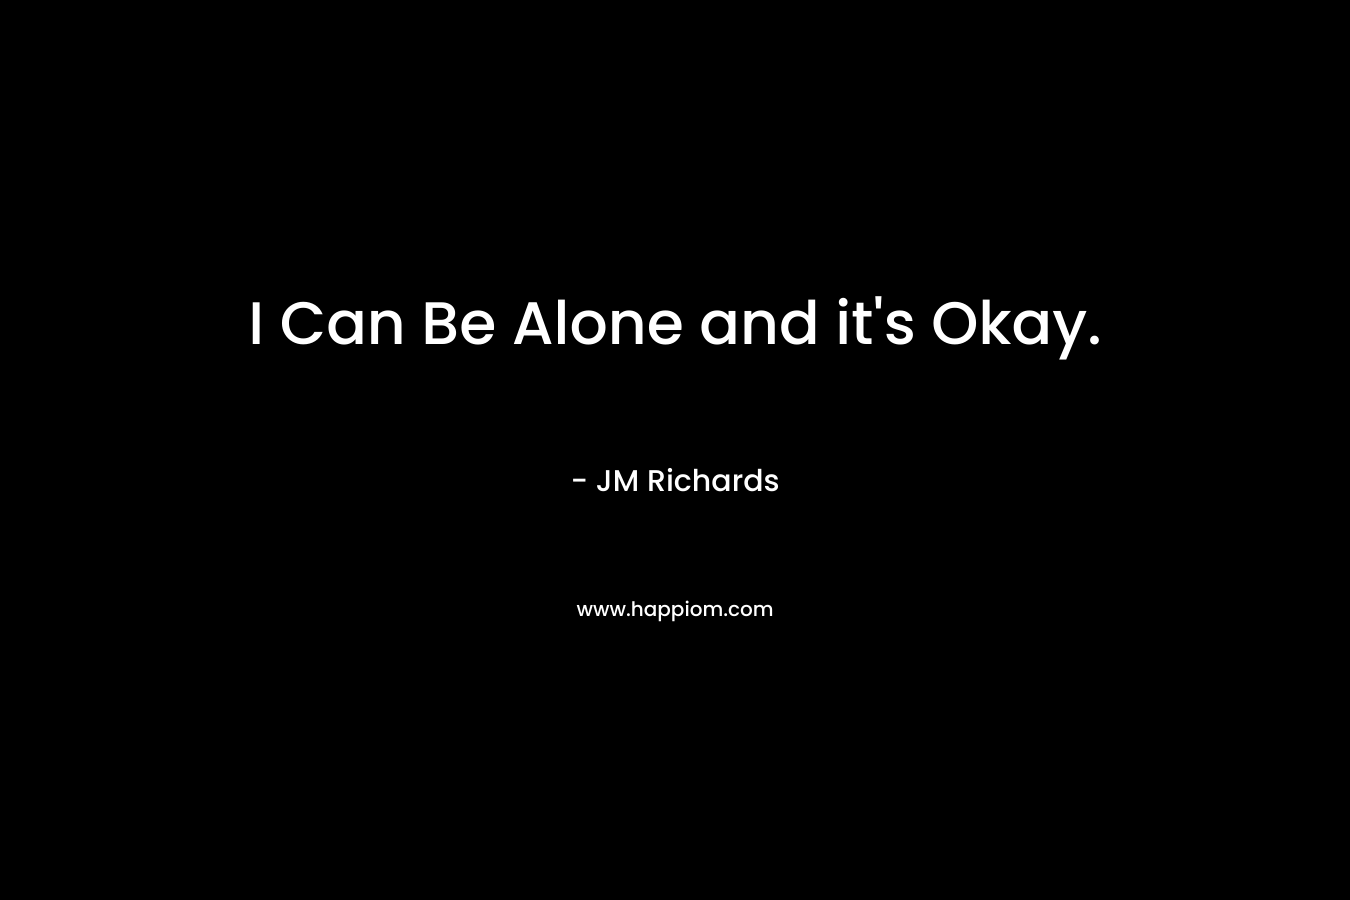 I Can Be Alone and it's Okay.